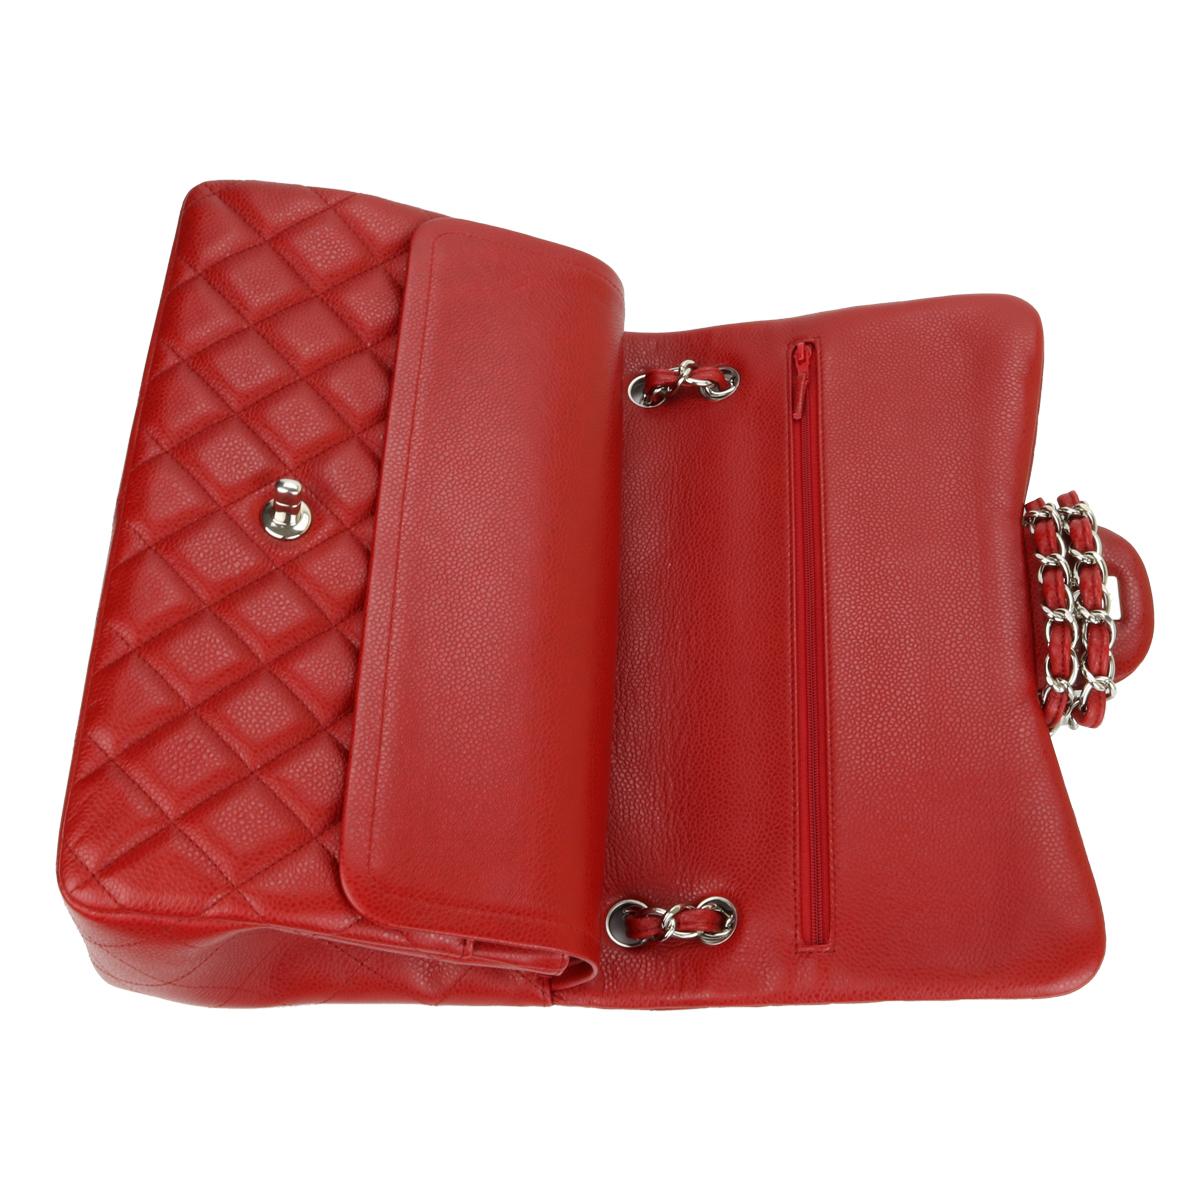 CHANEL Double Flap Jumbo Bag Red Caviar with Silver Hardware 2011 9